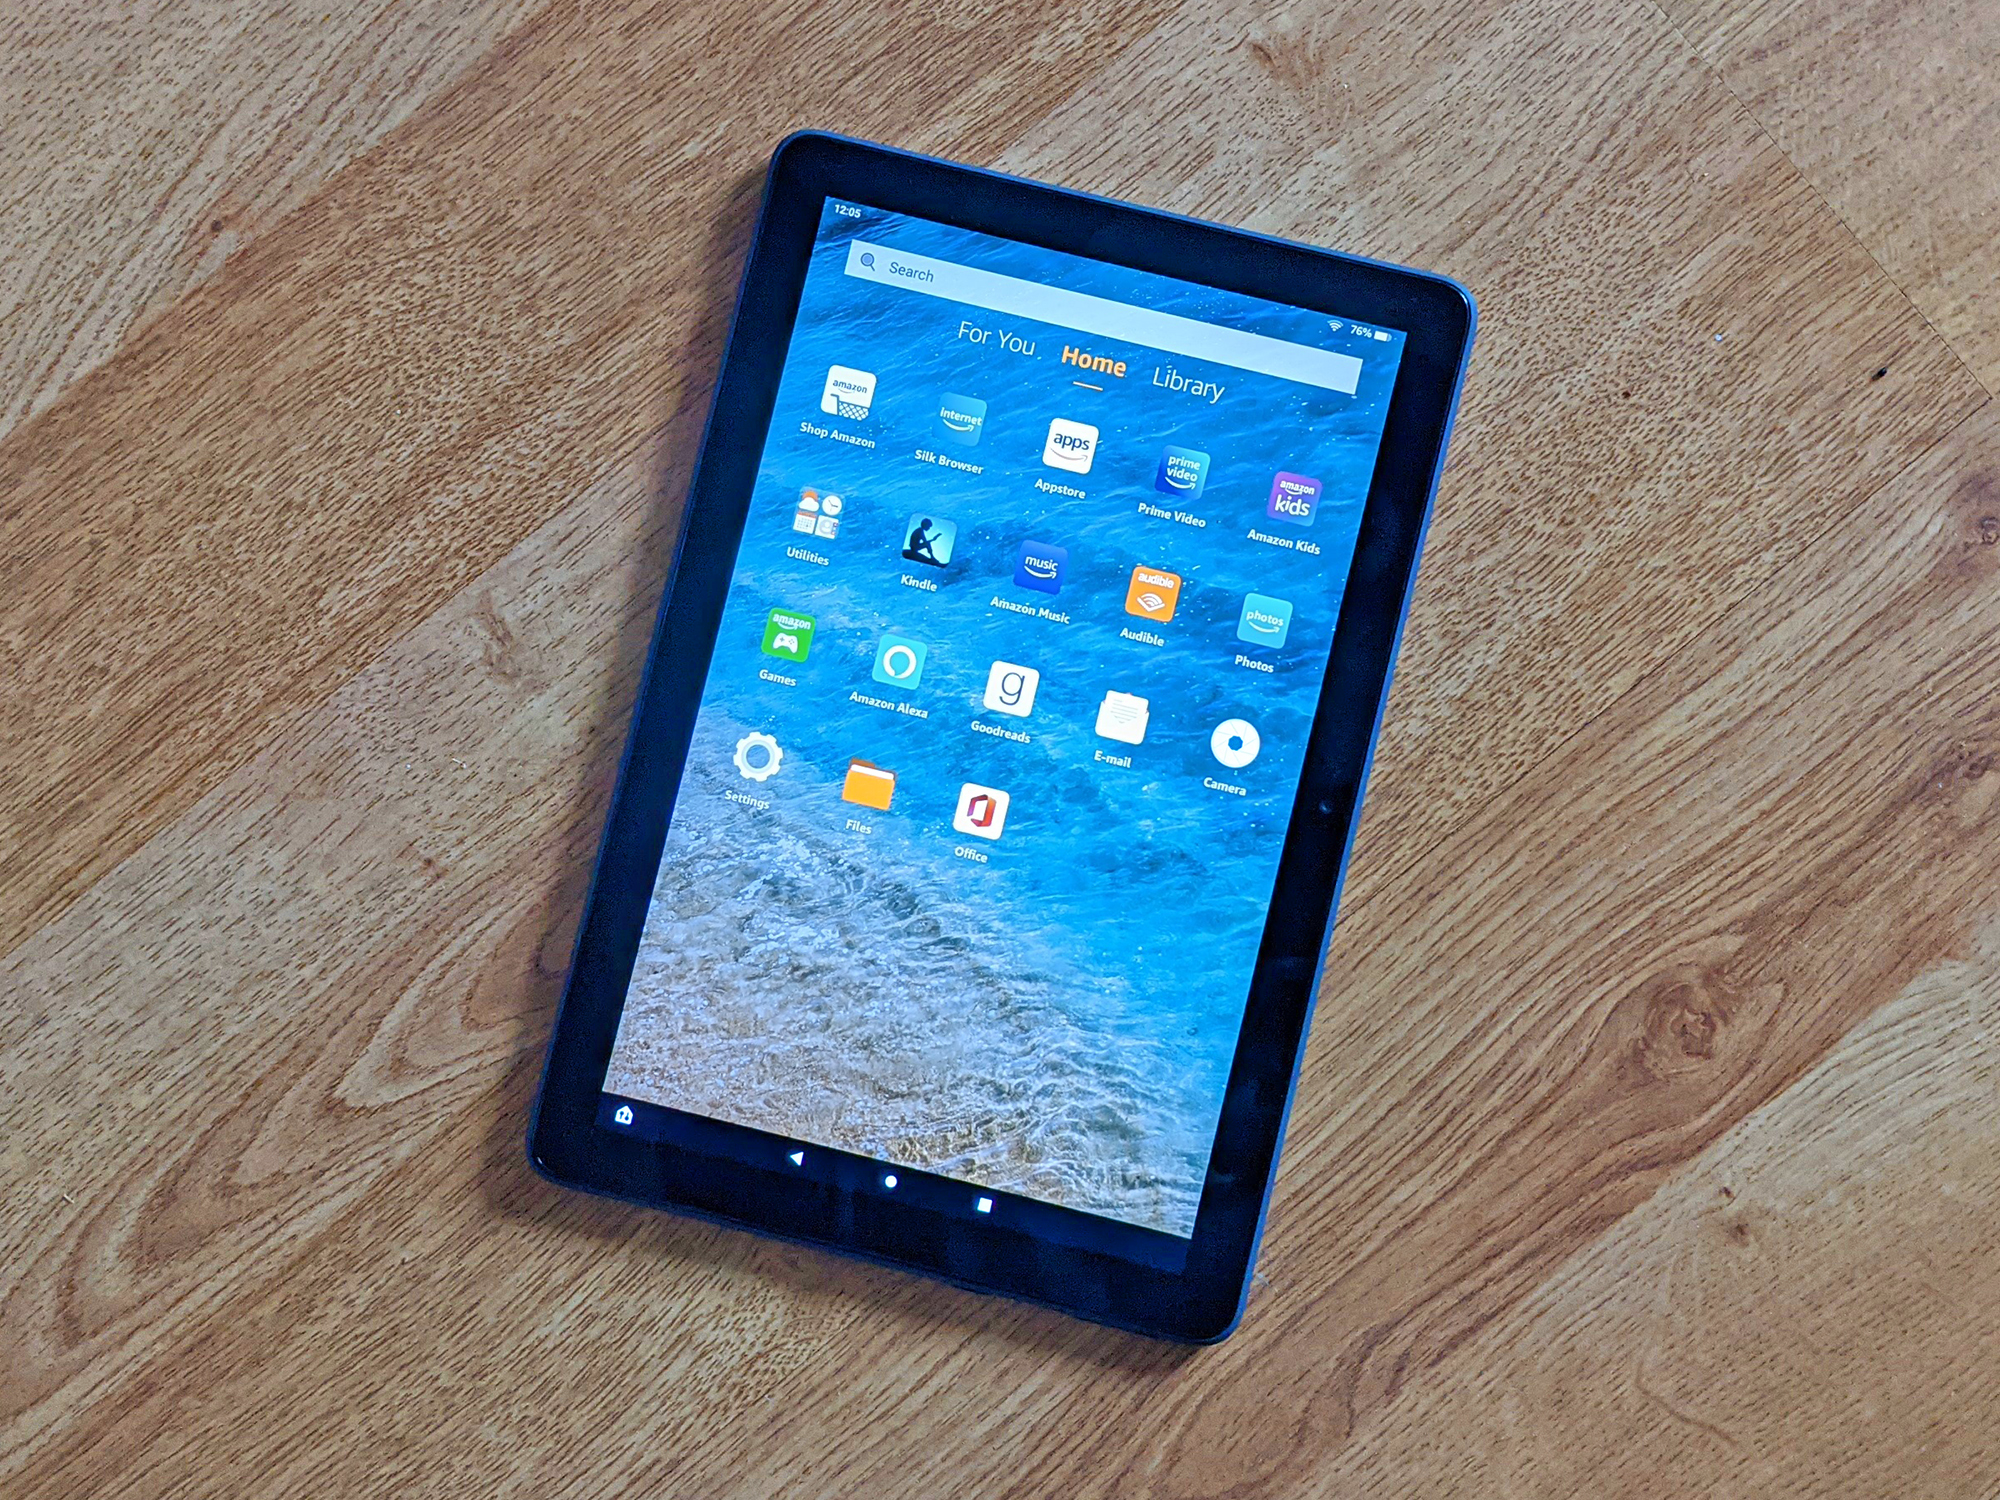 How to get any Android app on your Amazon Fire HD tablet, plus 8 other tips